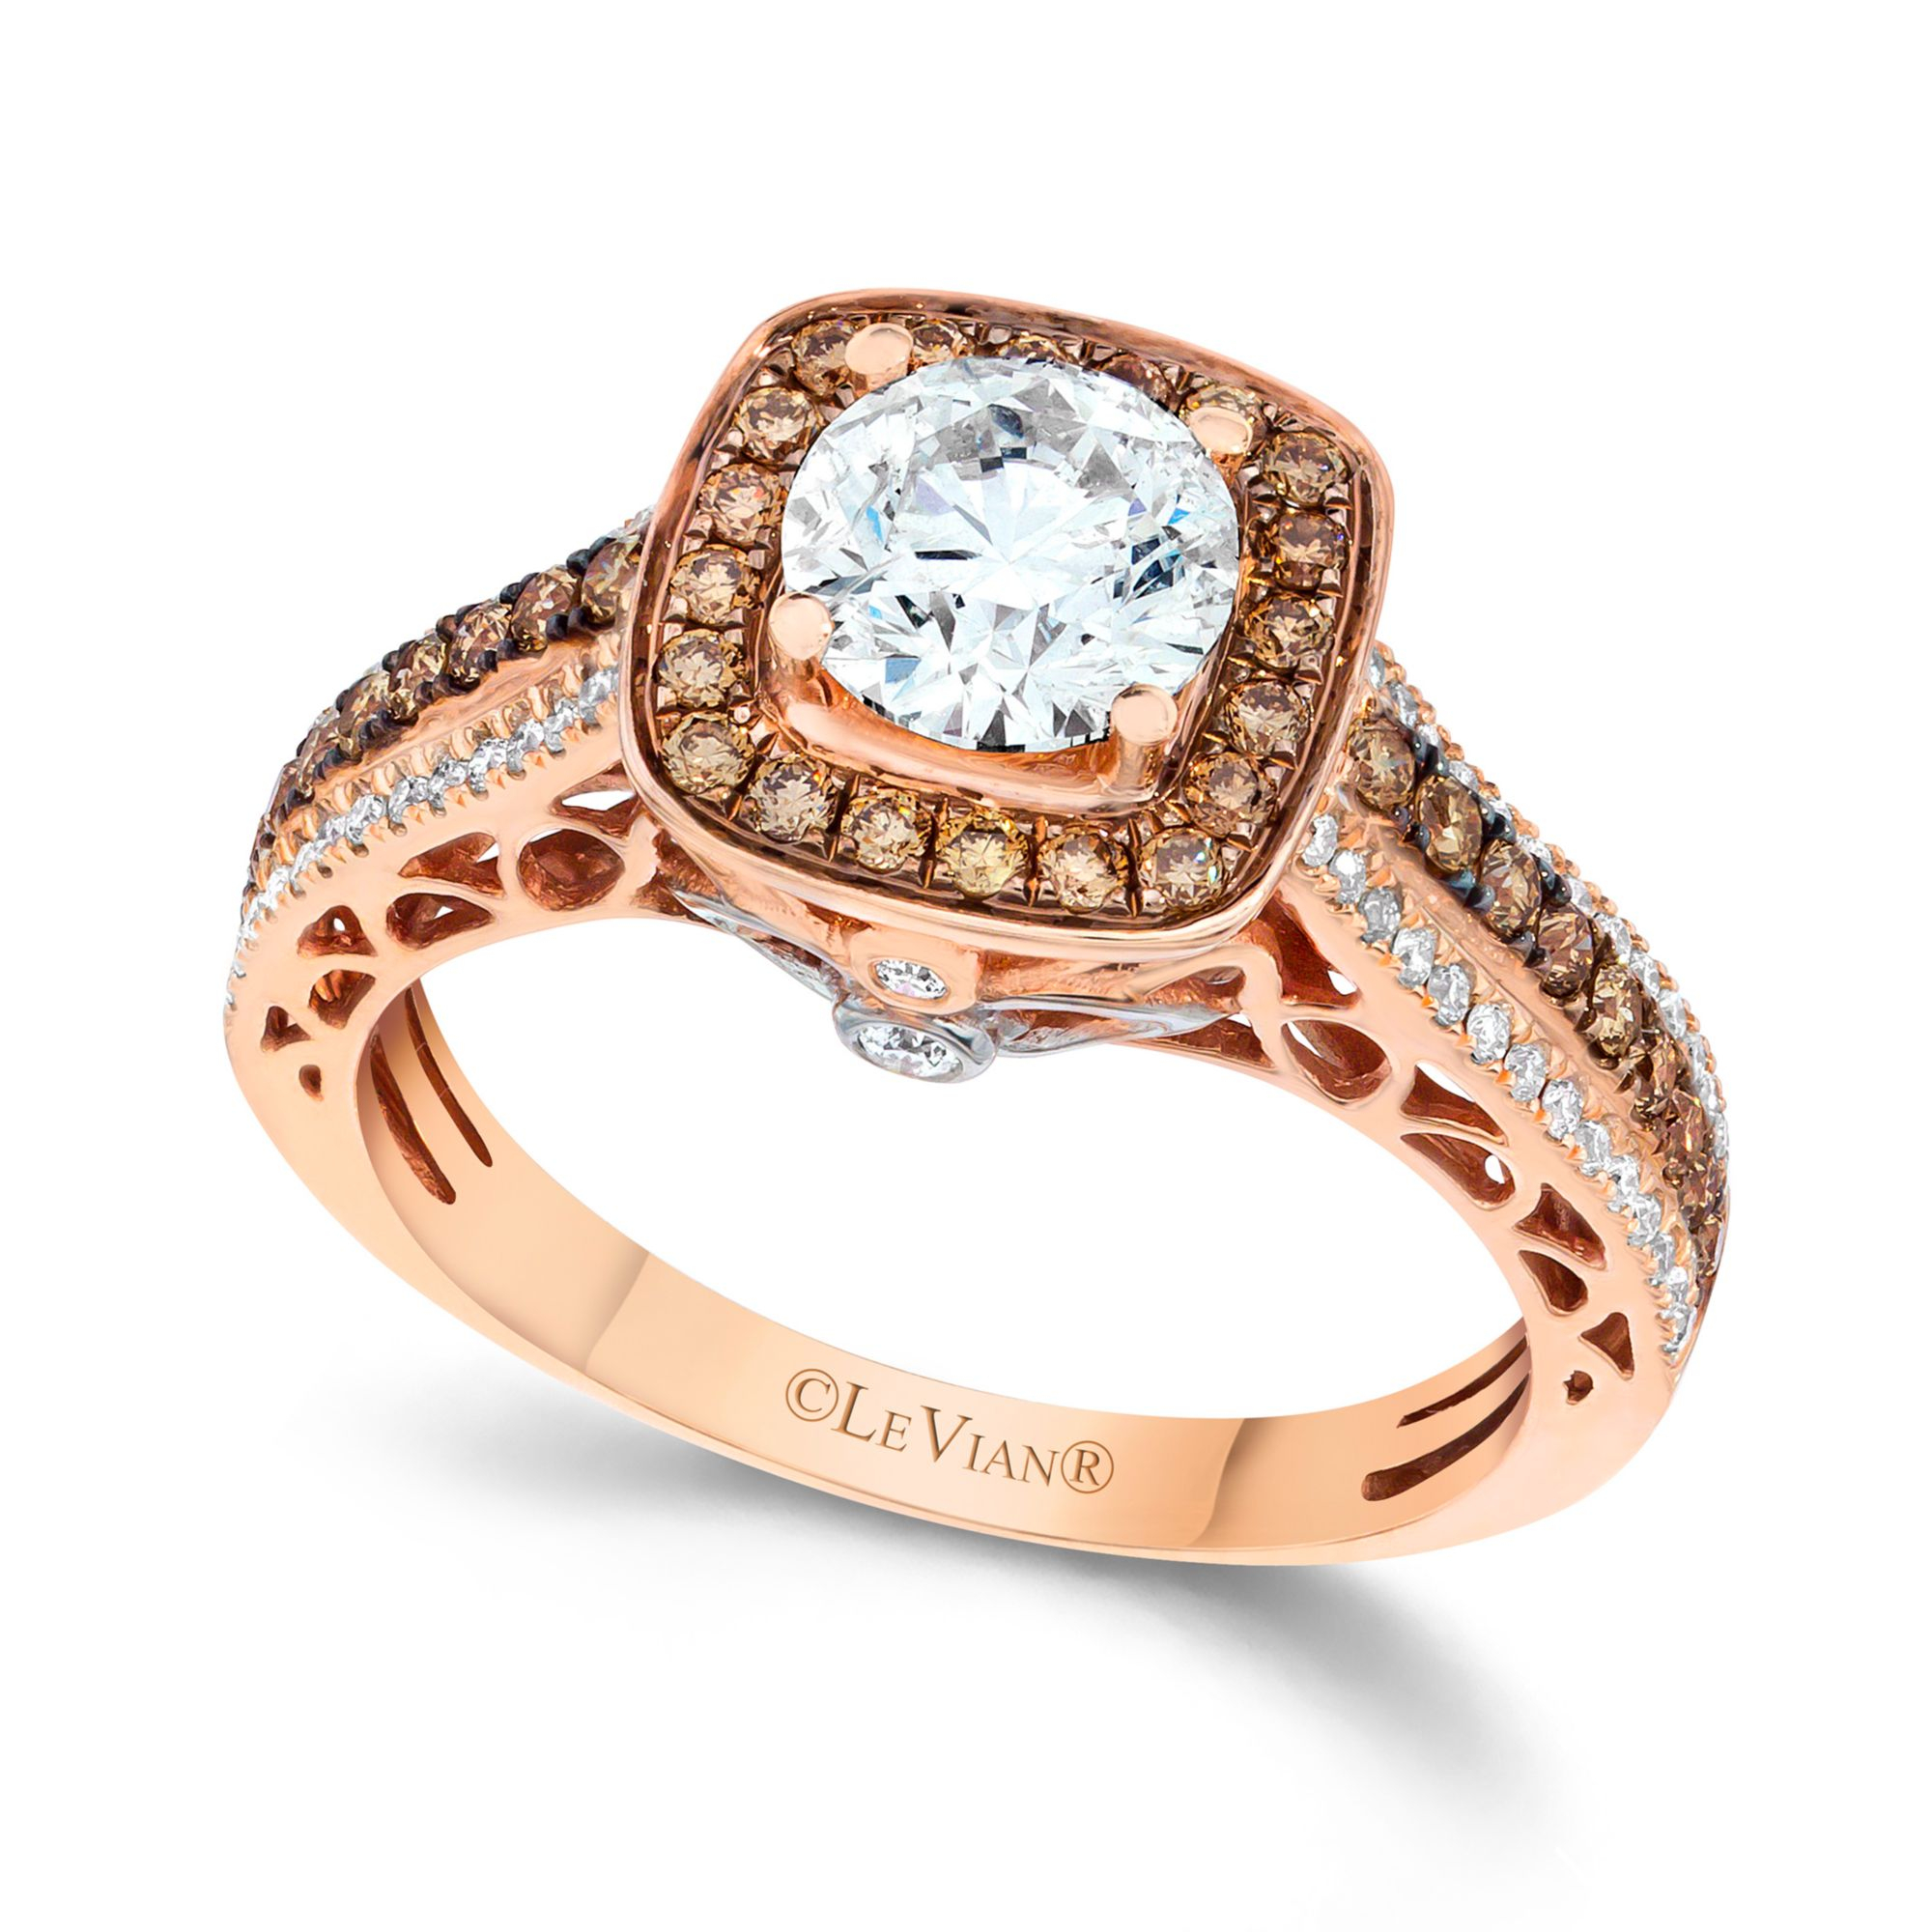 Le vian Chocolate and White Diamond Engagement Ring in 14k Rose Gold 112 Ct Tw in Metallic Lyst